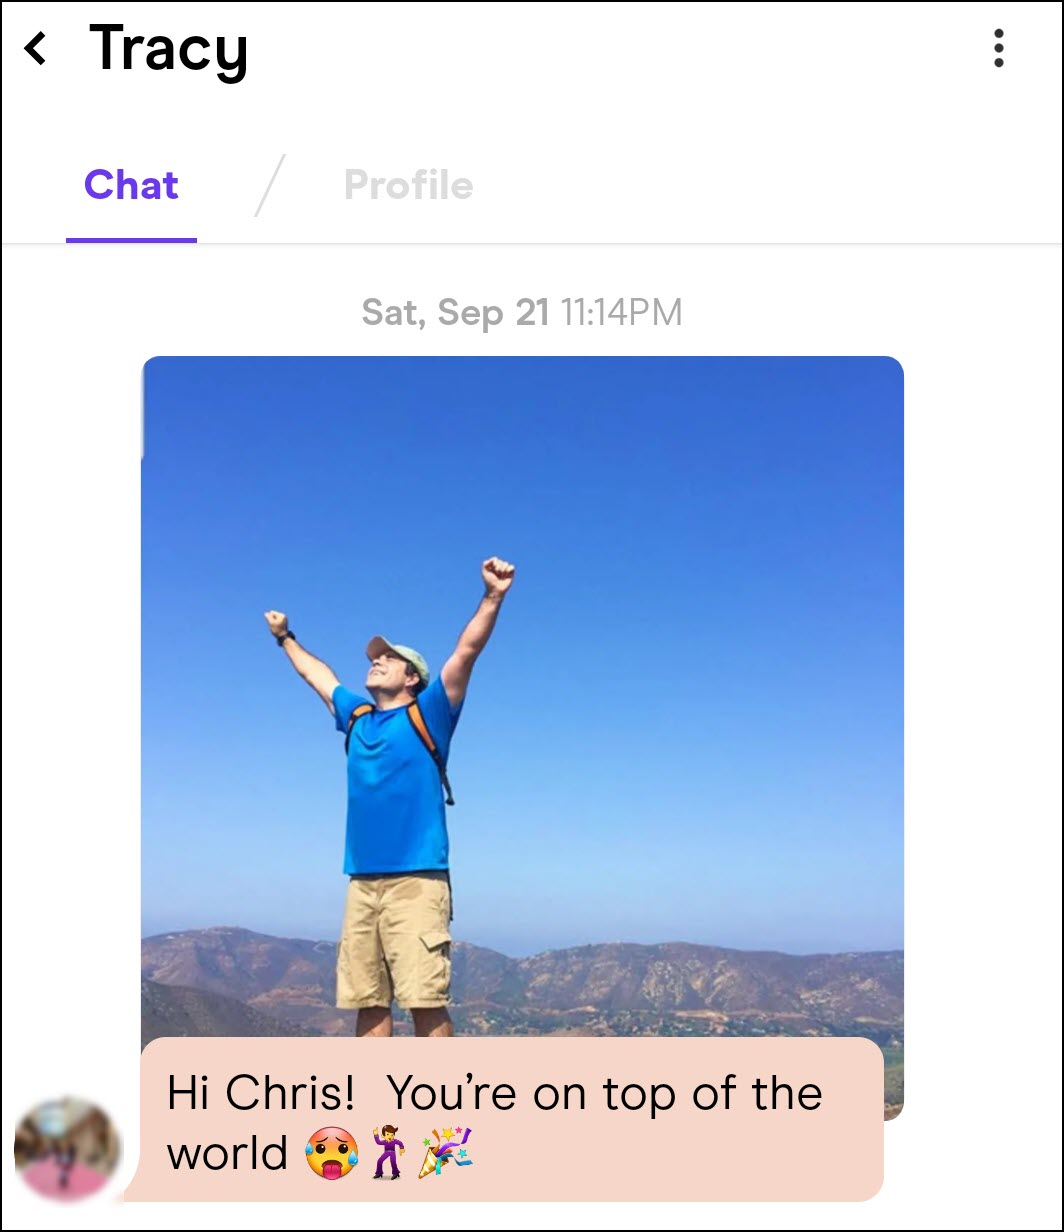 A good profile photo tip is raising your arms above your head